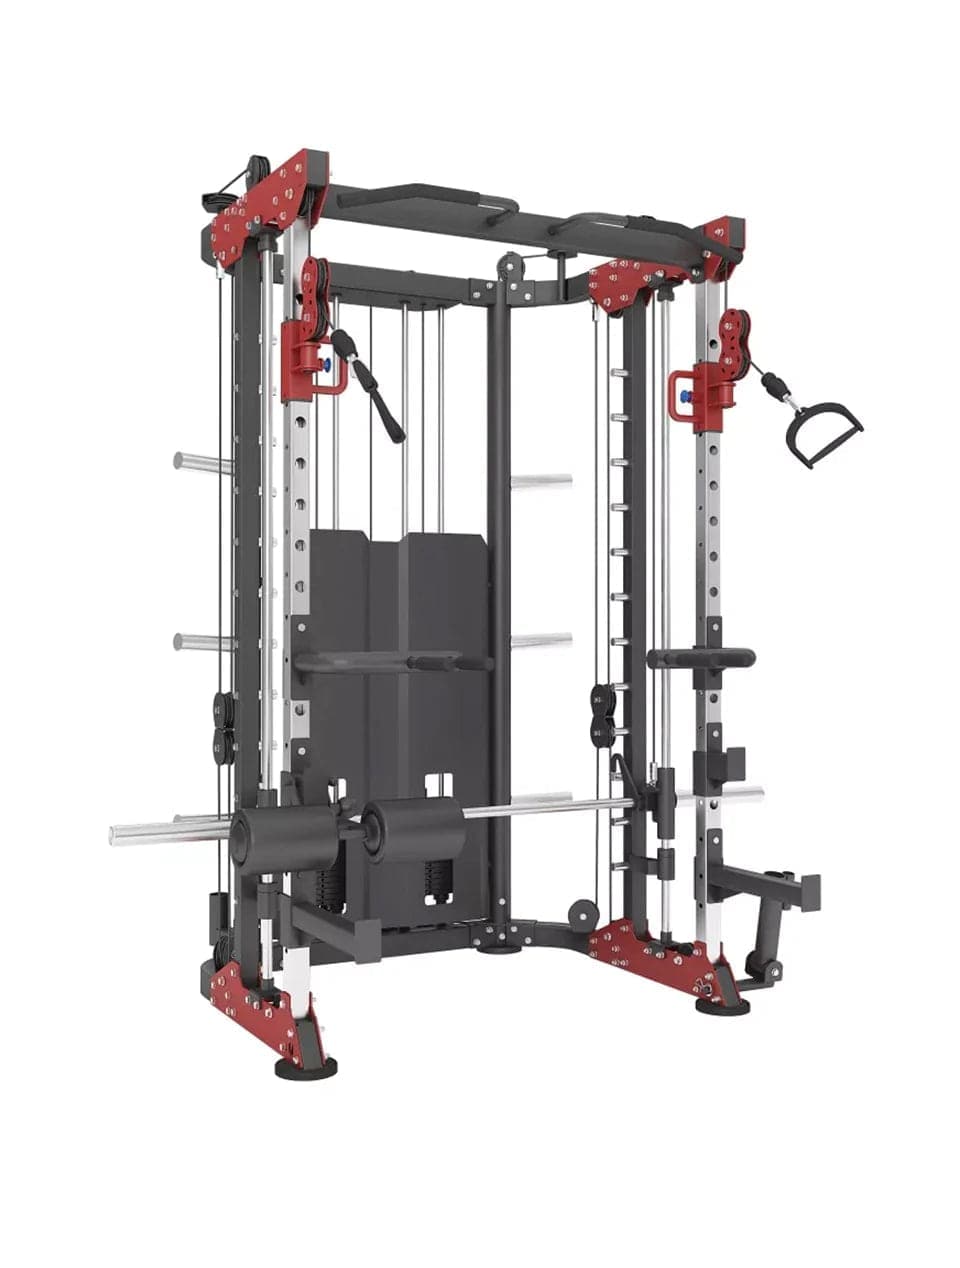 Combo Deal | 1441 Fitness Functional Trainer with Smith Machine - 41FC81 + 80kg Bumper Plate Set + Adjustable Bench A8007 + 4 Gym Tile - Athletix.ae